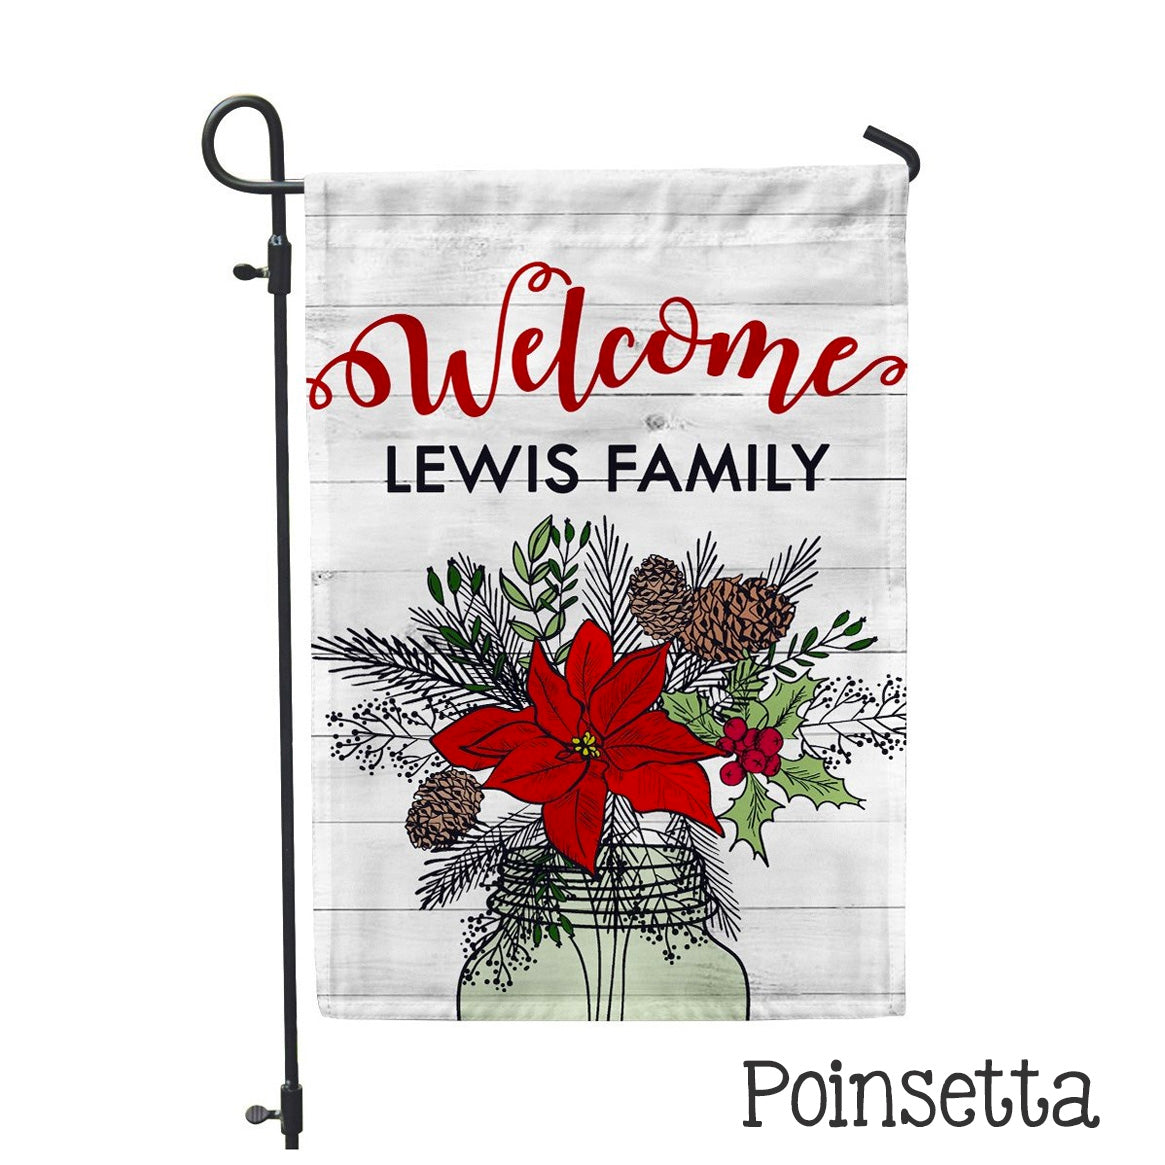 Personalized Garden Flag - Poinsetta Custom Home Flag - 12" x 18" - Second East